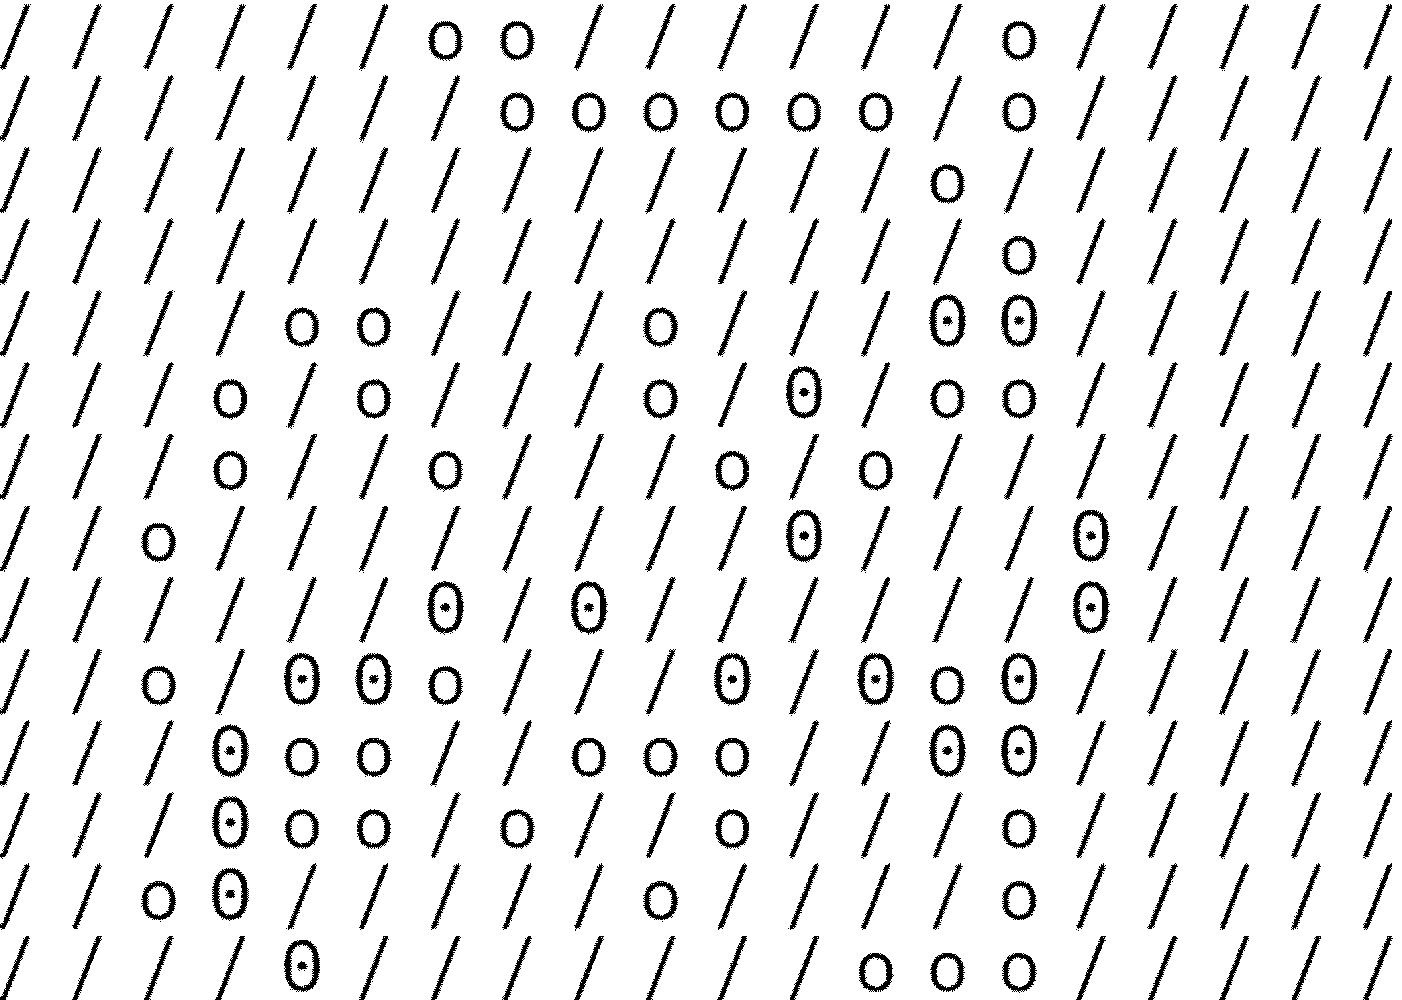 a grid of glyphs, some flickering and changing symbols. as the cursor passes over certain glyphs, a black rectangle appears, containing white text.